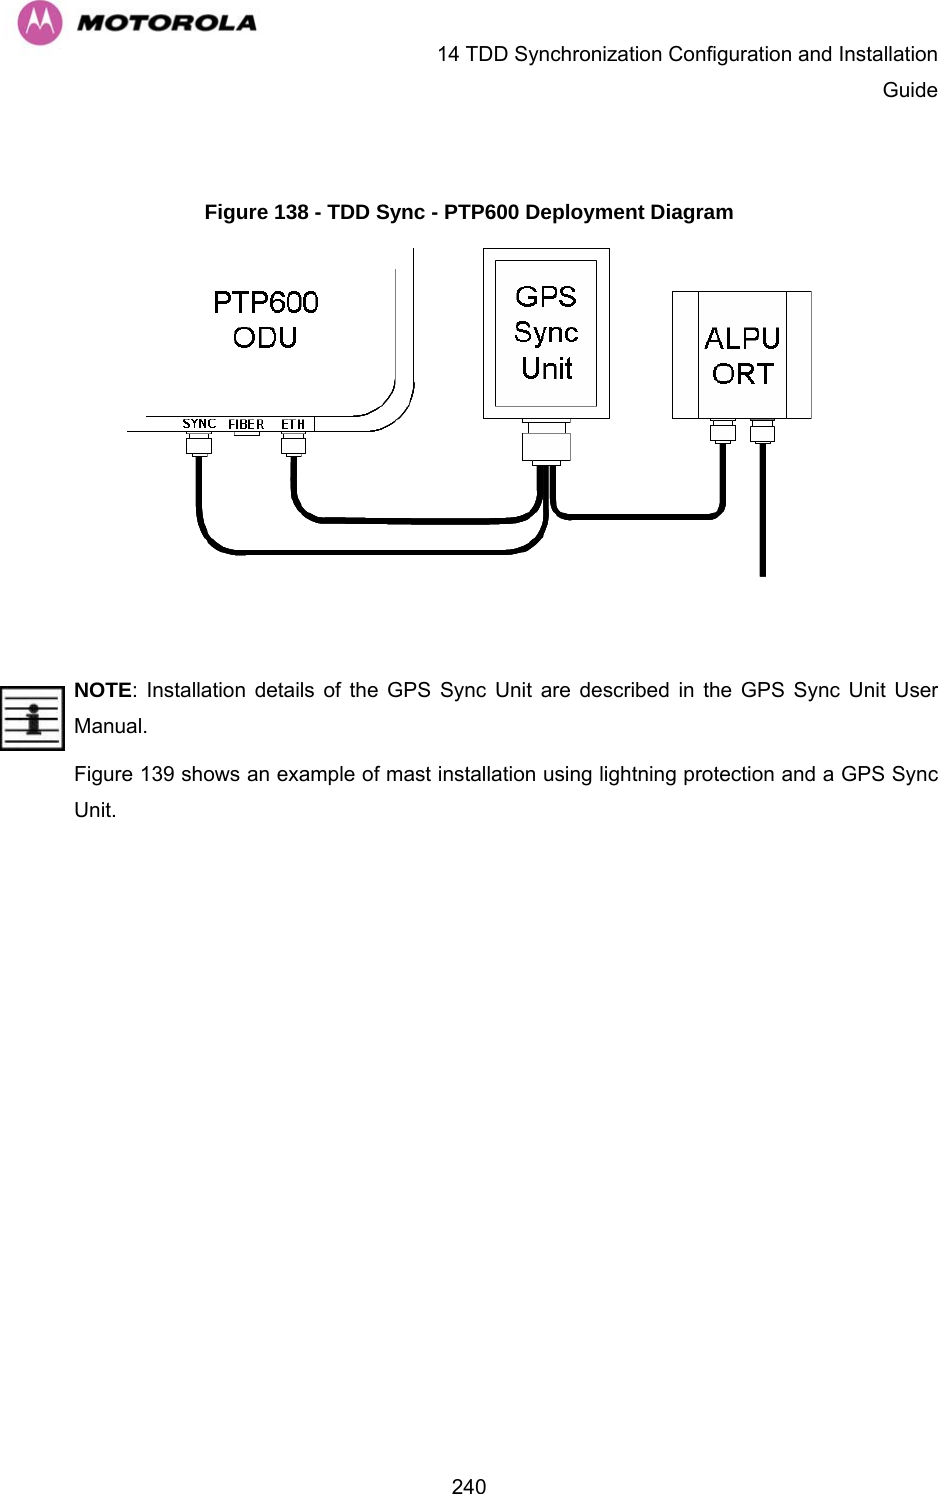   14 TDD Synchronization Configuration and Installation Guide  240 Figure 138 - TDD Sync - PTP600 Deployment Diagram   NOTE: Installation details of the GPS Sync Unit are described in the GPS Sync Unit User Manual.  Figure 139 shows an example of mast installation using lightning protection and a GPS Sync Unit. 